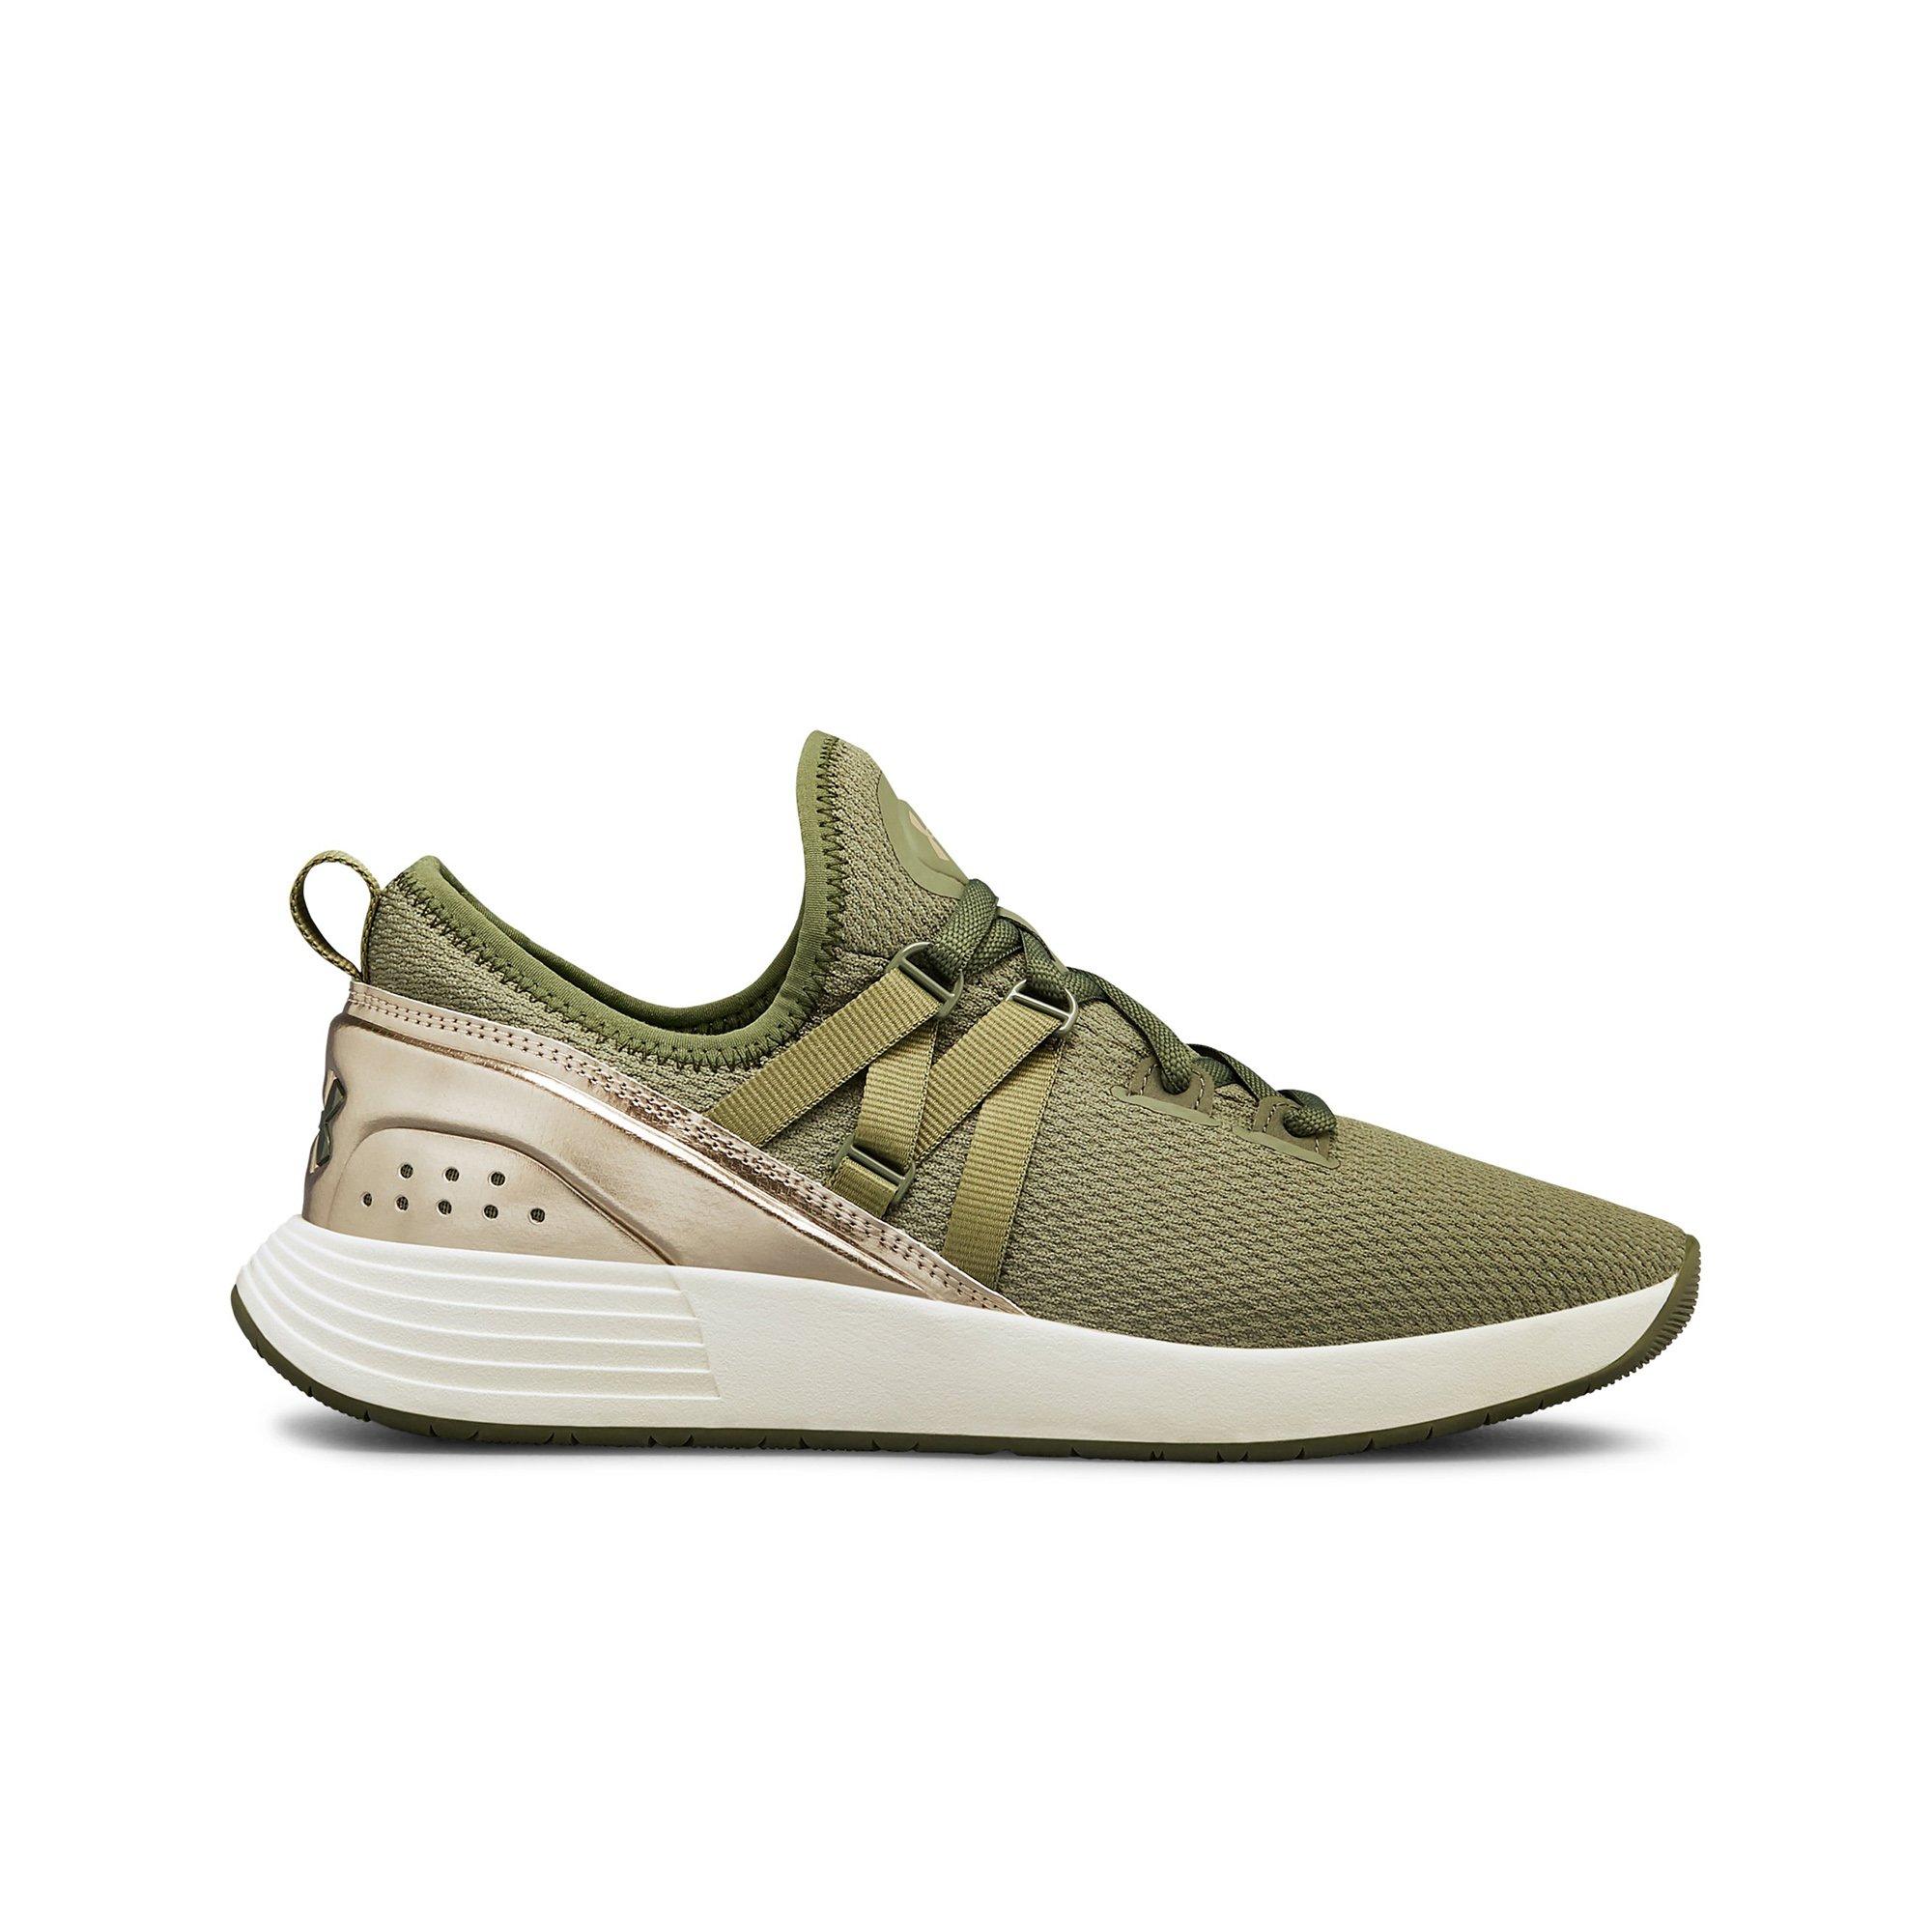 under armour trainers green